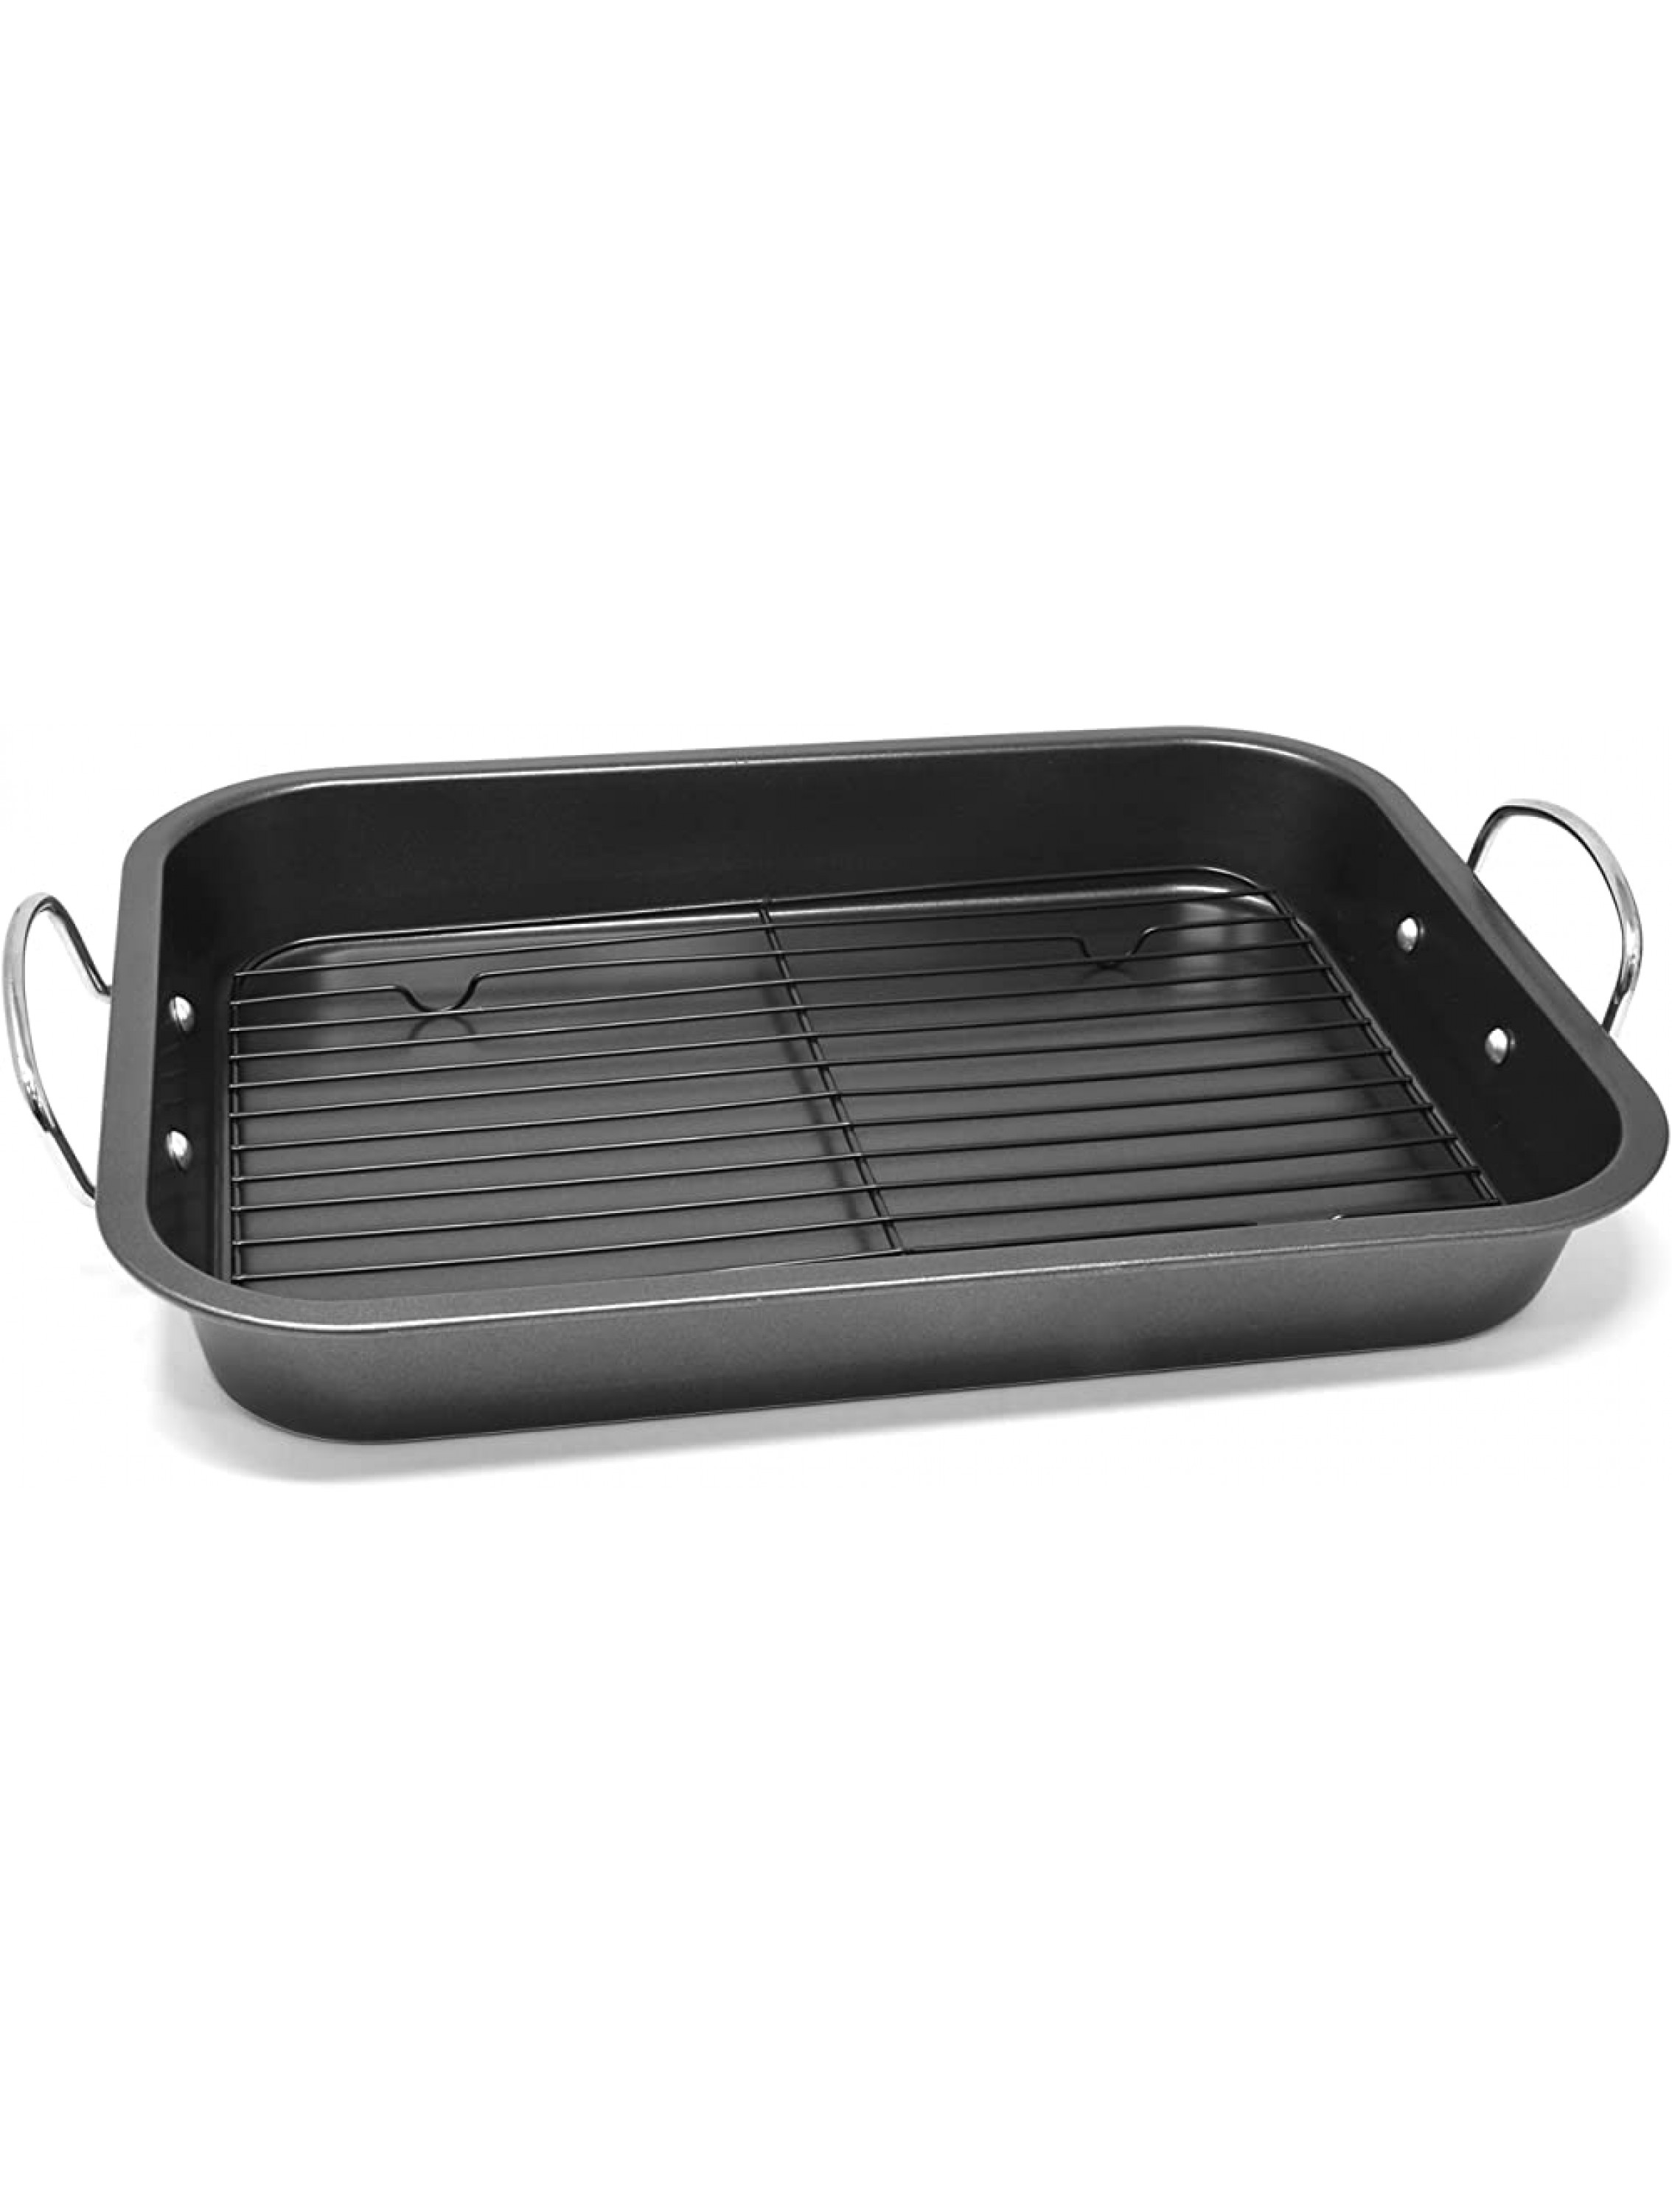 PERLLI Roasting Pan with Rack Nonstick Stainless Steel 11 by 15 Inch Turkey Roaster Pan with Removable Wire Rack for Oven Cooking Broiling Baking Large Cookware Deep Dish Pan for Oven Use - B1T87NKOT